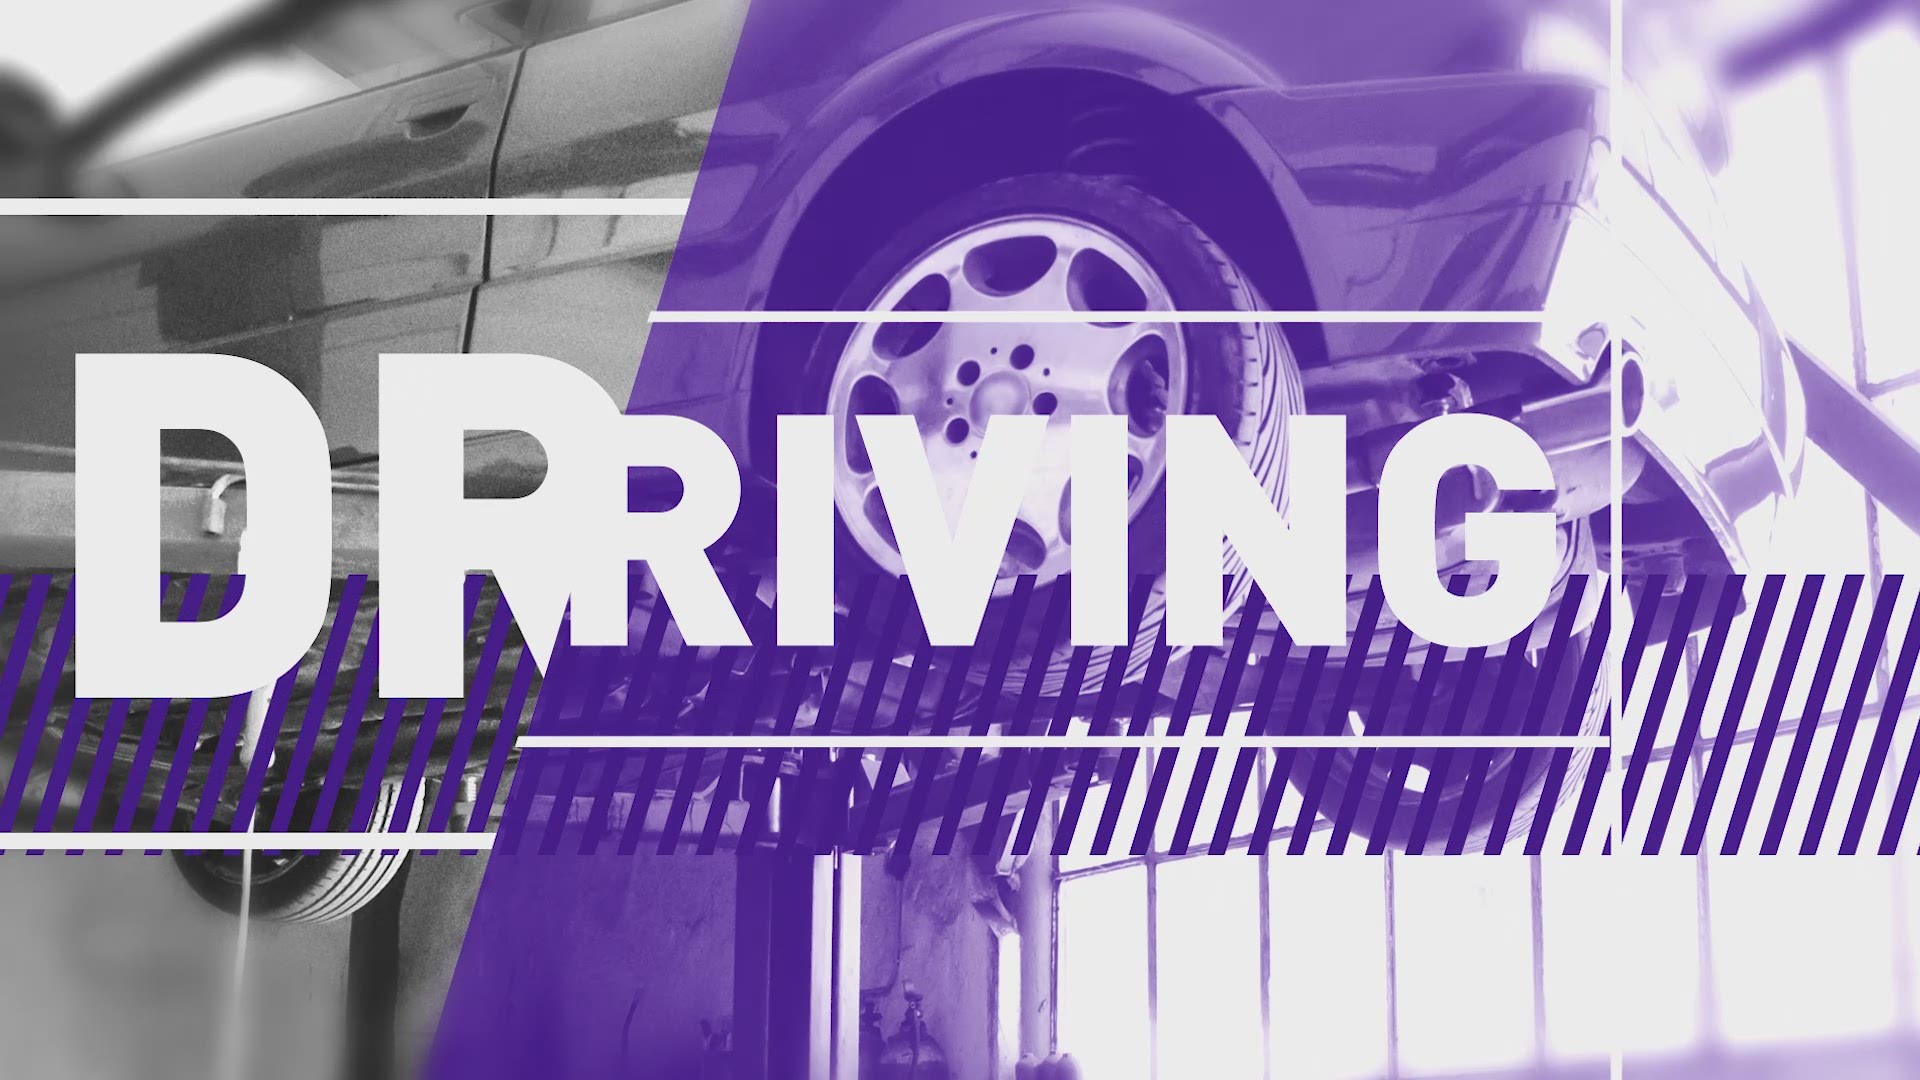 Matt Schmitz of Cars.com provides tips to avoid buying a flood-damaged car in this week's segment of Driving Smart.